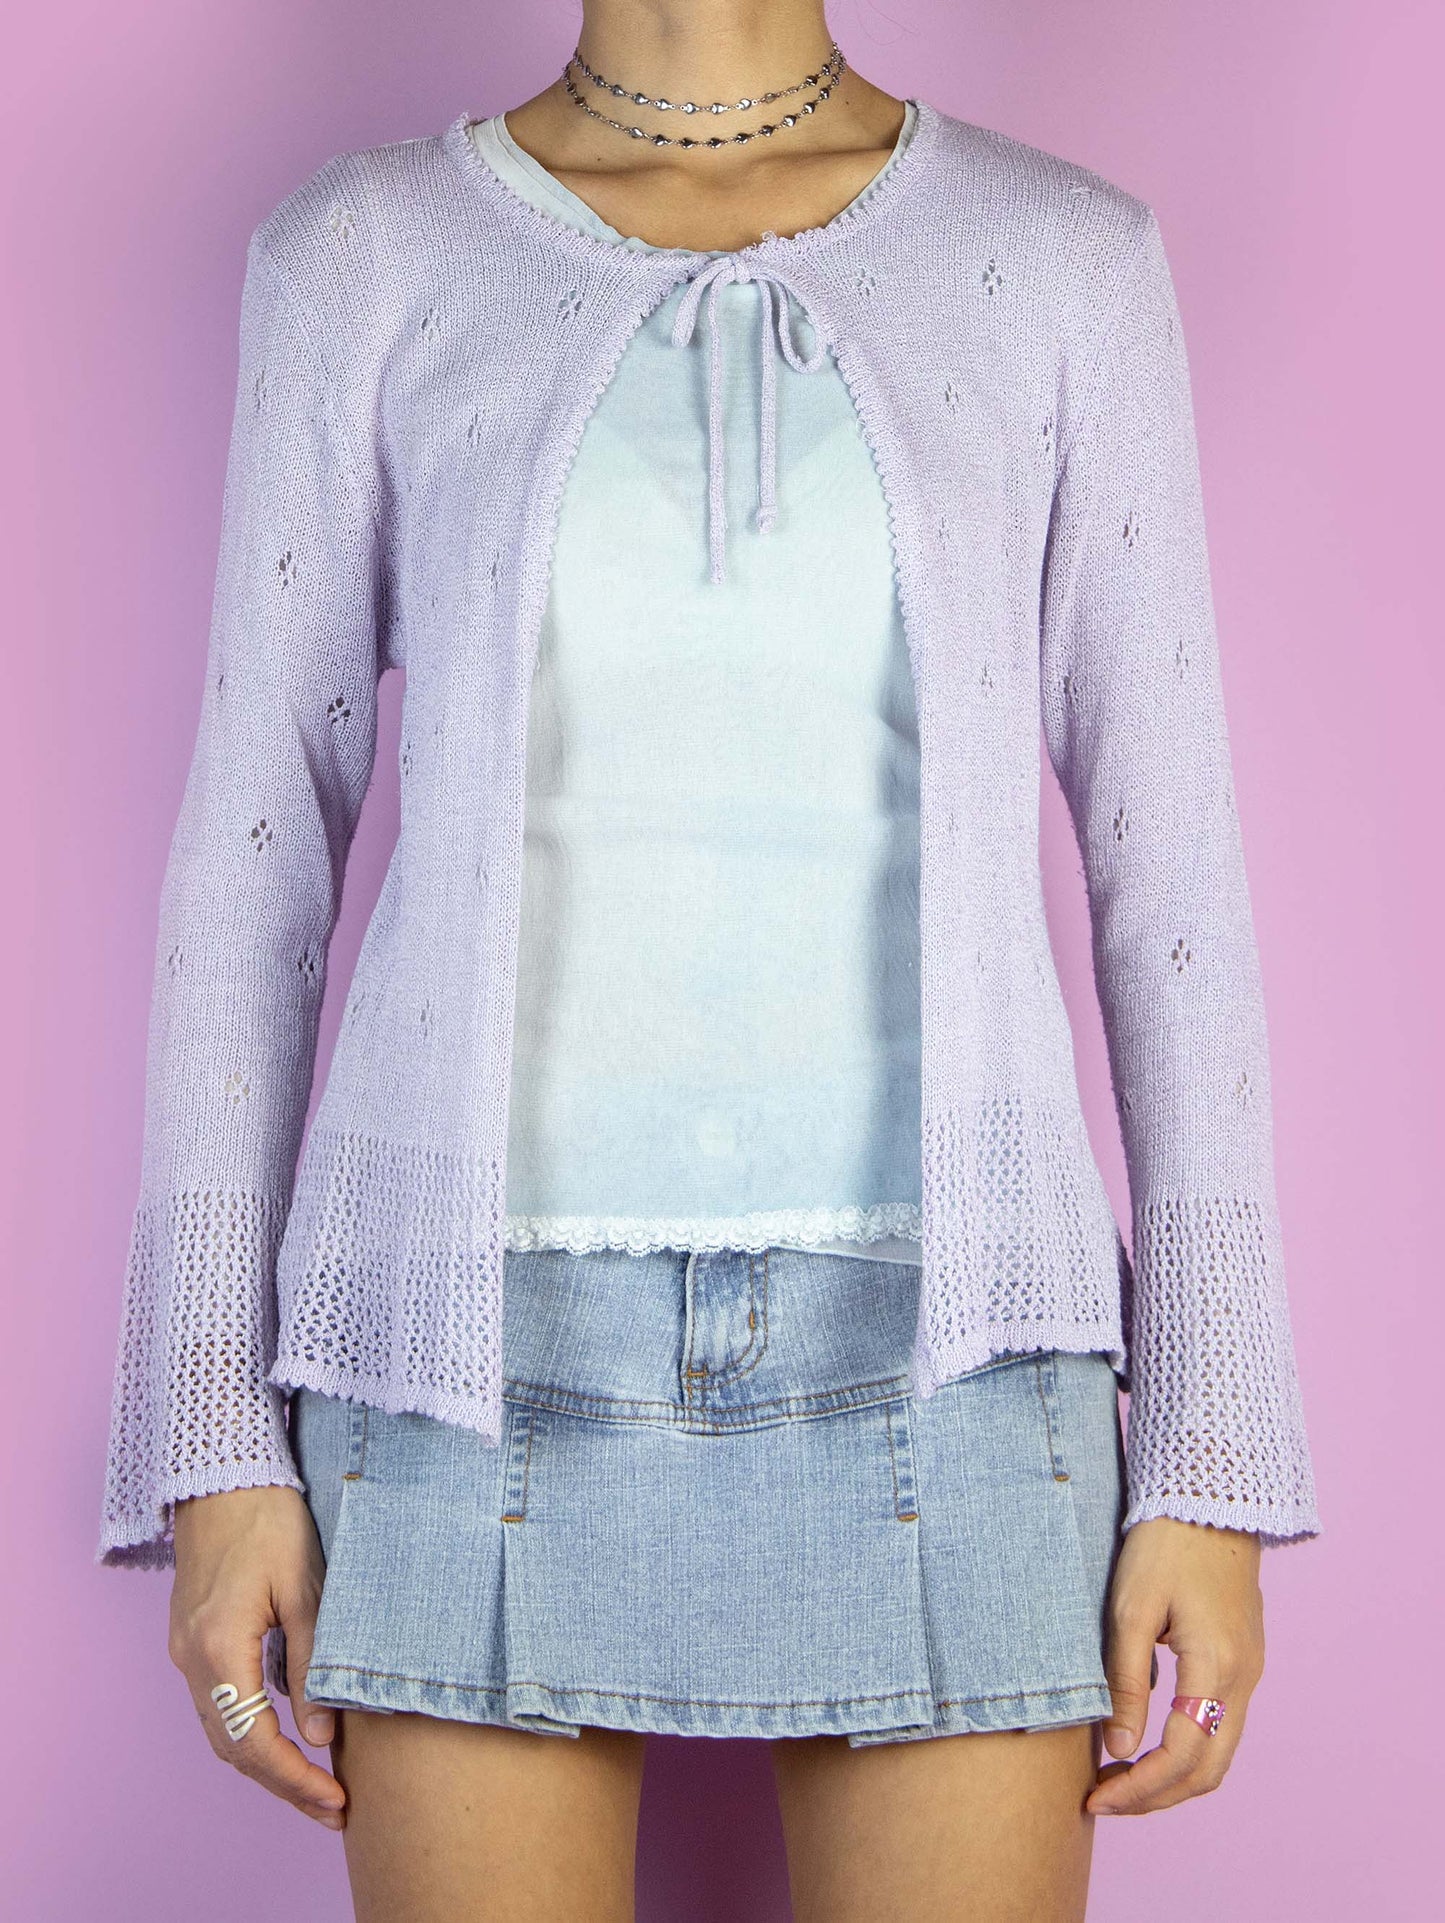 The Y2K Lilac Tie Front Cardigan is a vintage 2000s pastel light purple bolero that features a delicate knit with eyelet details, flared sleeves and has a tie closure at the neckline.